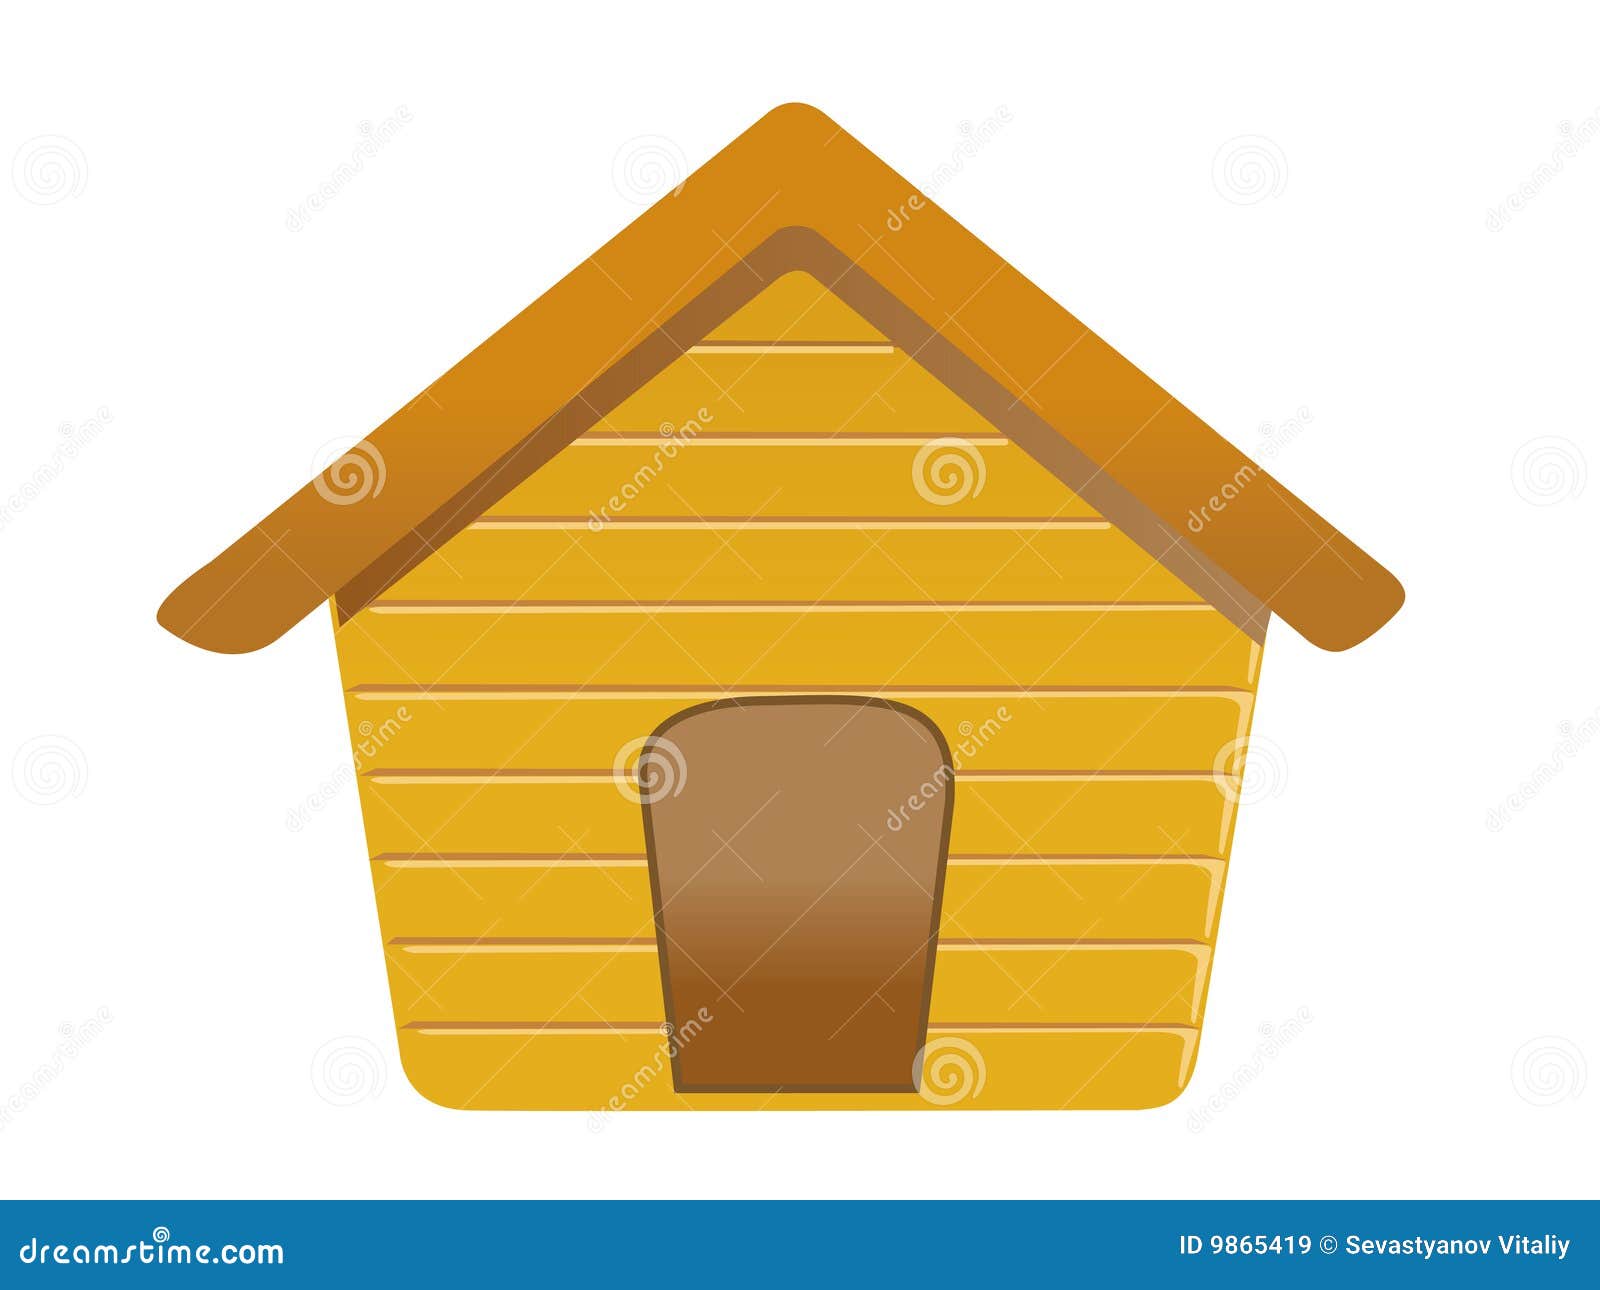 dog house clipart images - photo #45